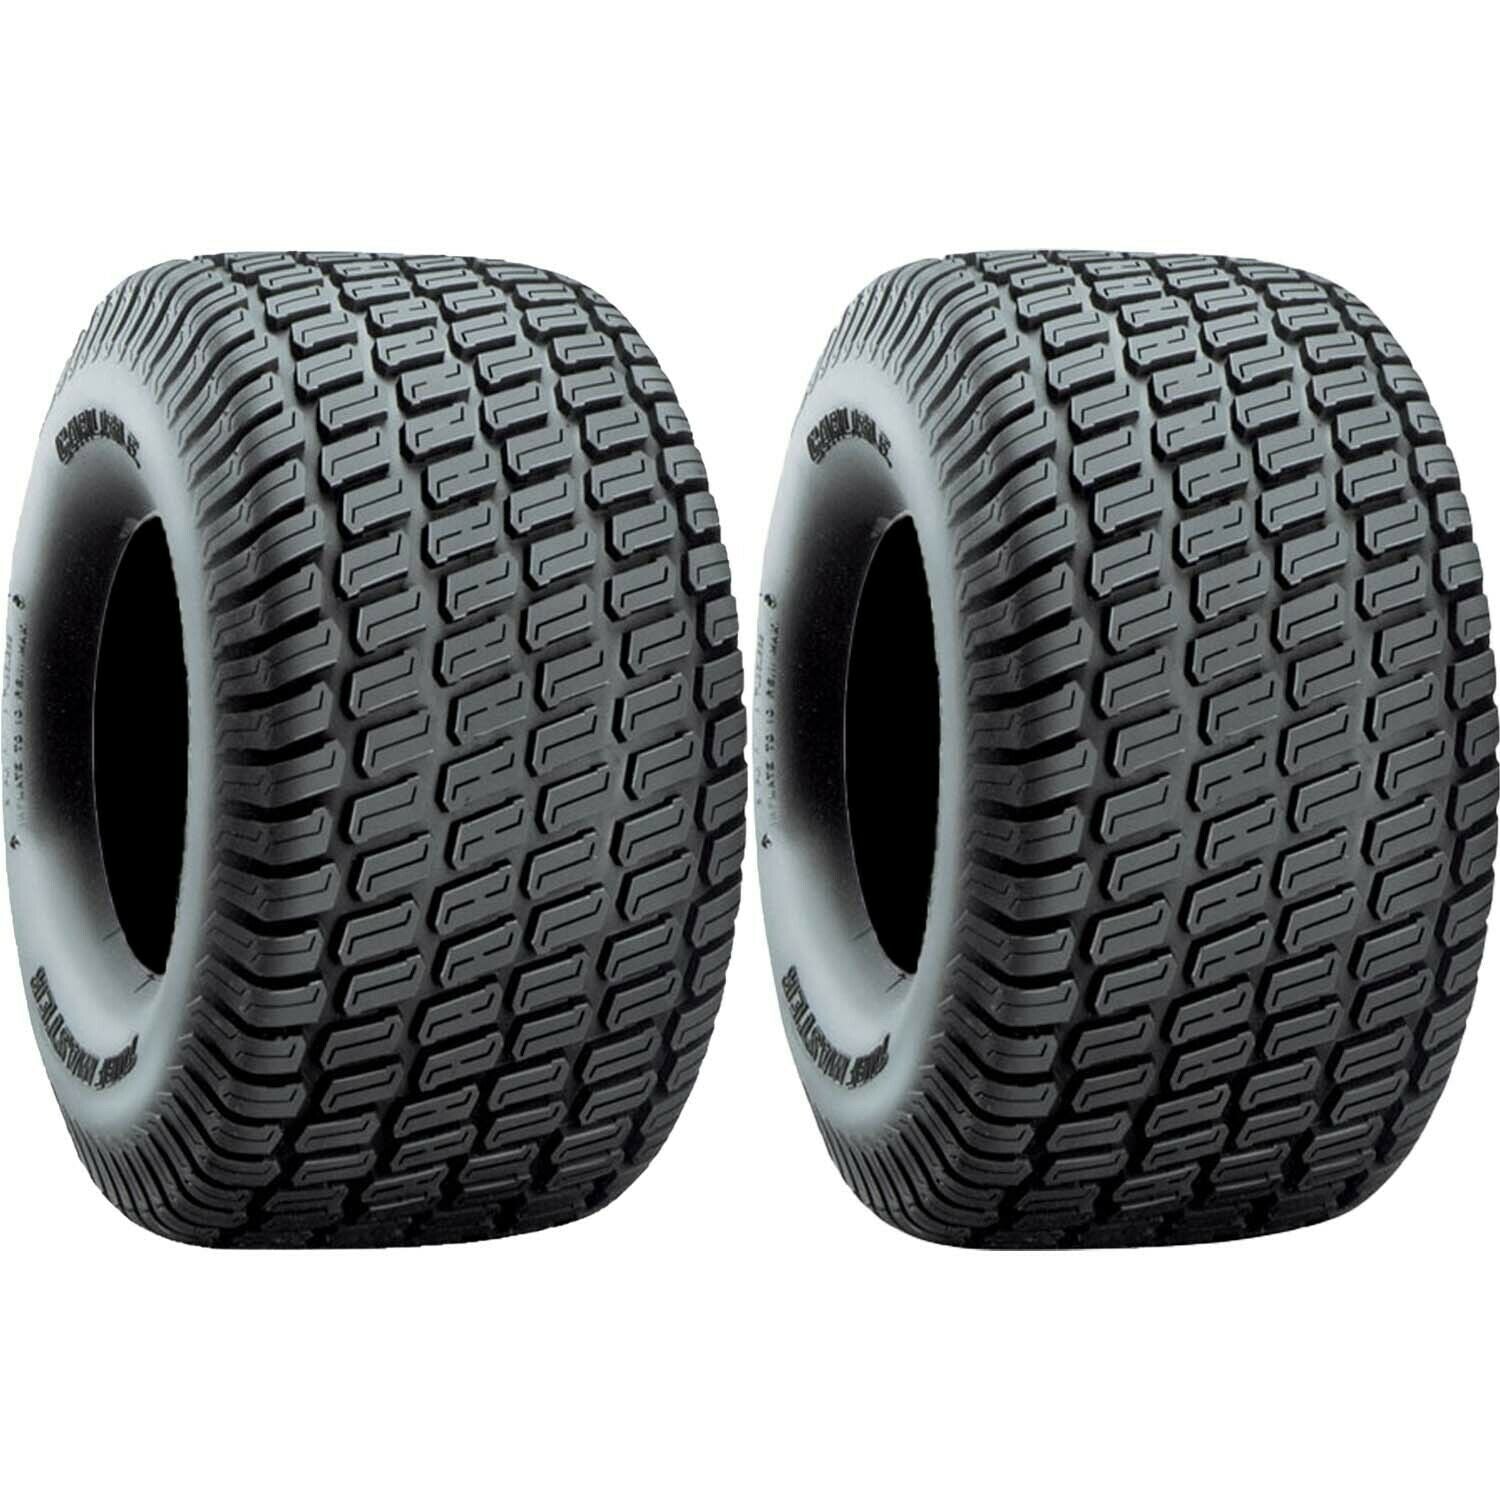 Carlisle Turf Master Lawn and Garden Tire 4Ply 16x6.50-8 - Pack of 2